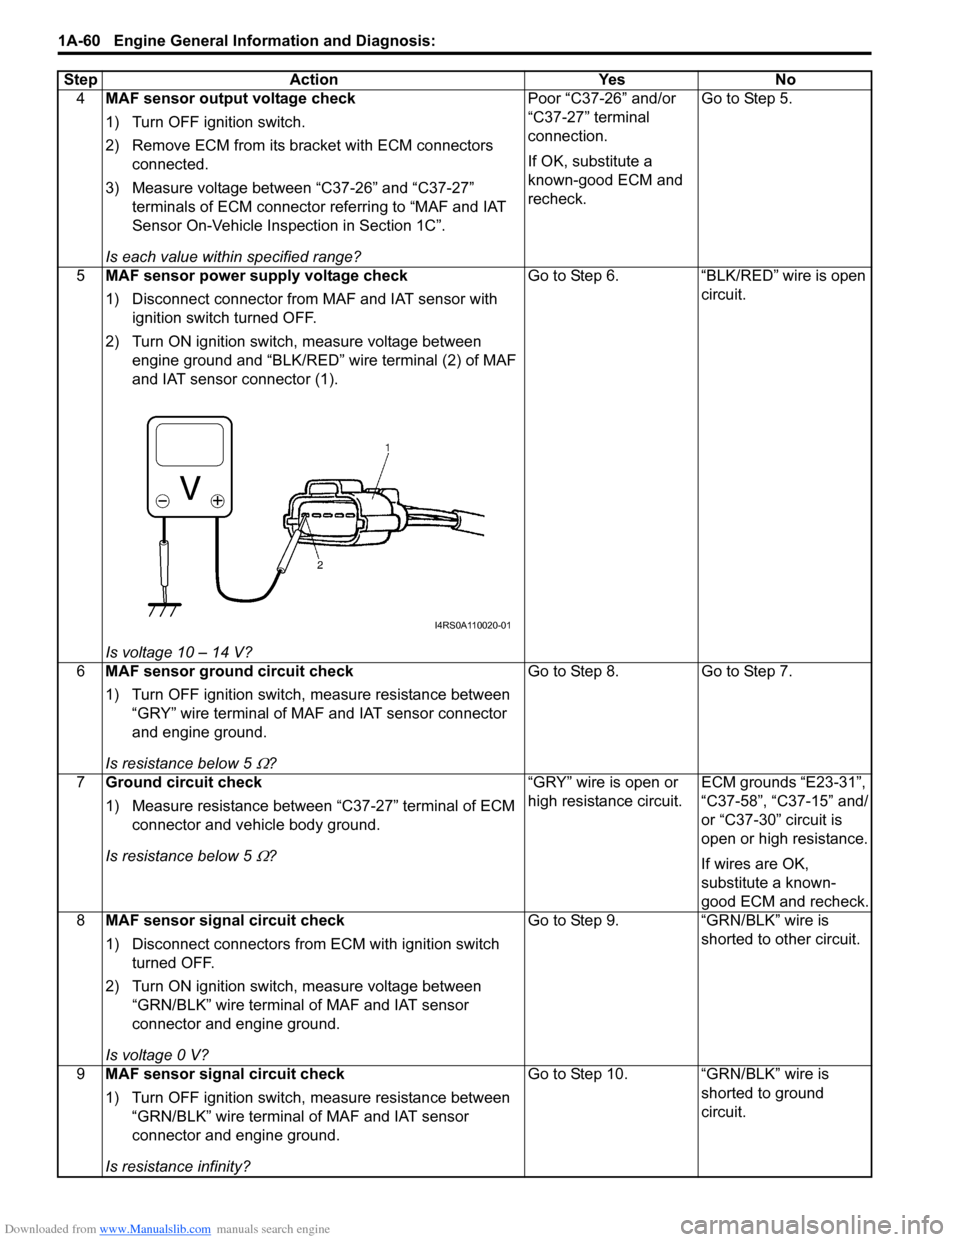 SUZUKI SWIFT 2007 2.G Service Workshop Manual Downloaded from www.Manualslib.com manuals search engine 1A-60 Engine General Information and Diagnosis: 
4MAF sensor output voltage check
1) Turn OFF ignition switch.
2) Remove ECM from its br acket 